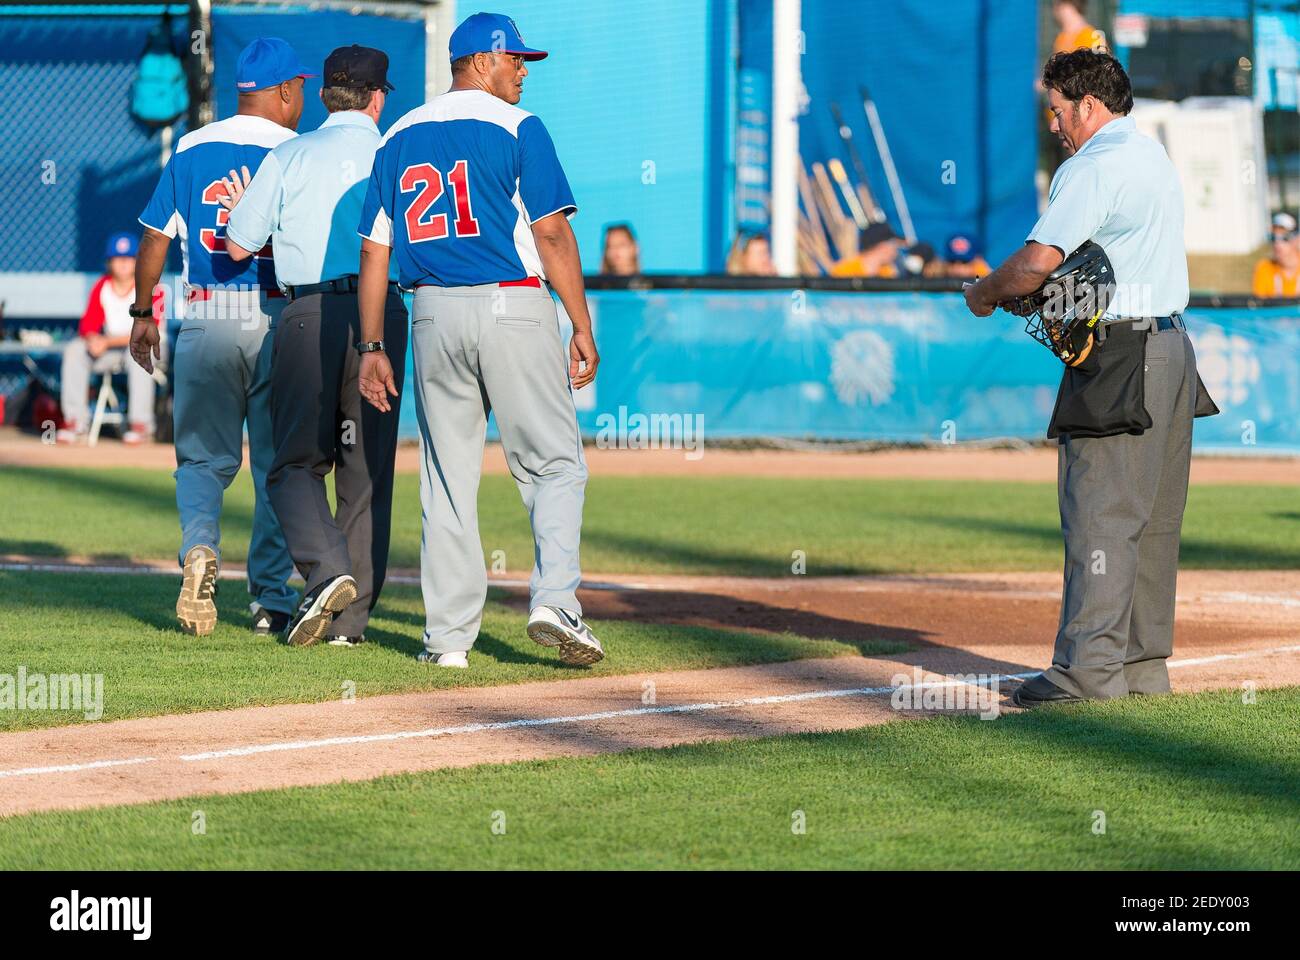 Toronto Panam Baseball 2015-Cuba vs the Dominican Republic:  Dominican manager Denio Gonzales comes to end the argument and takes his coach away. Stock Photo